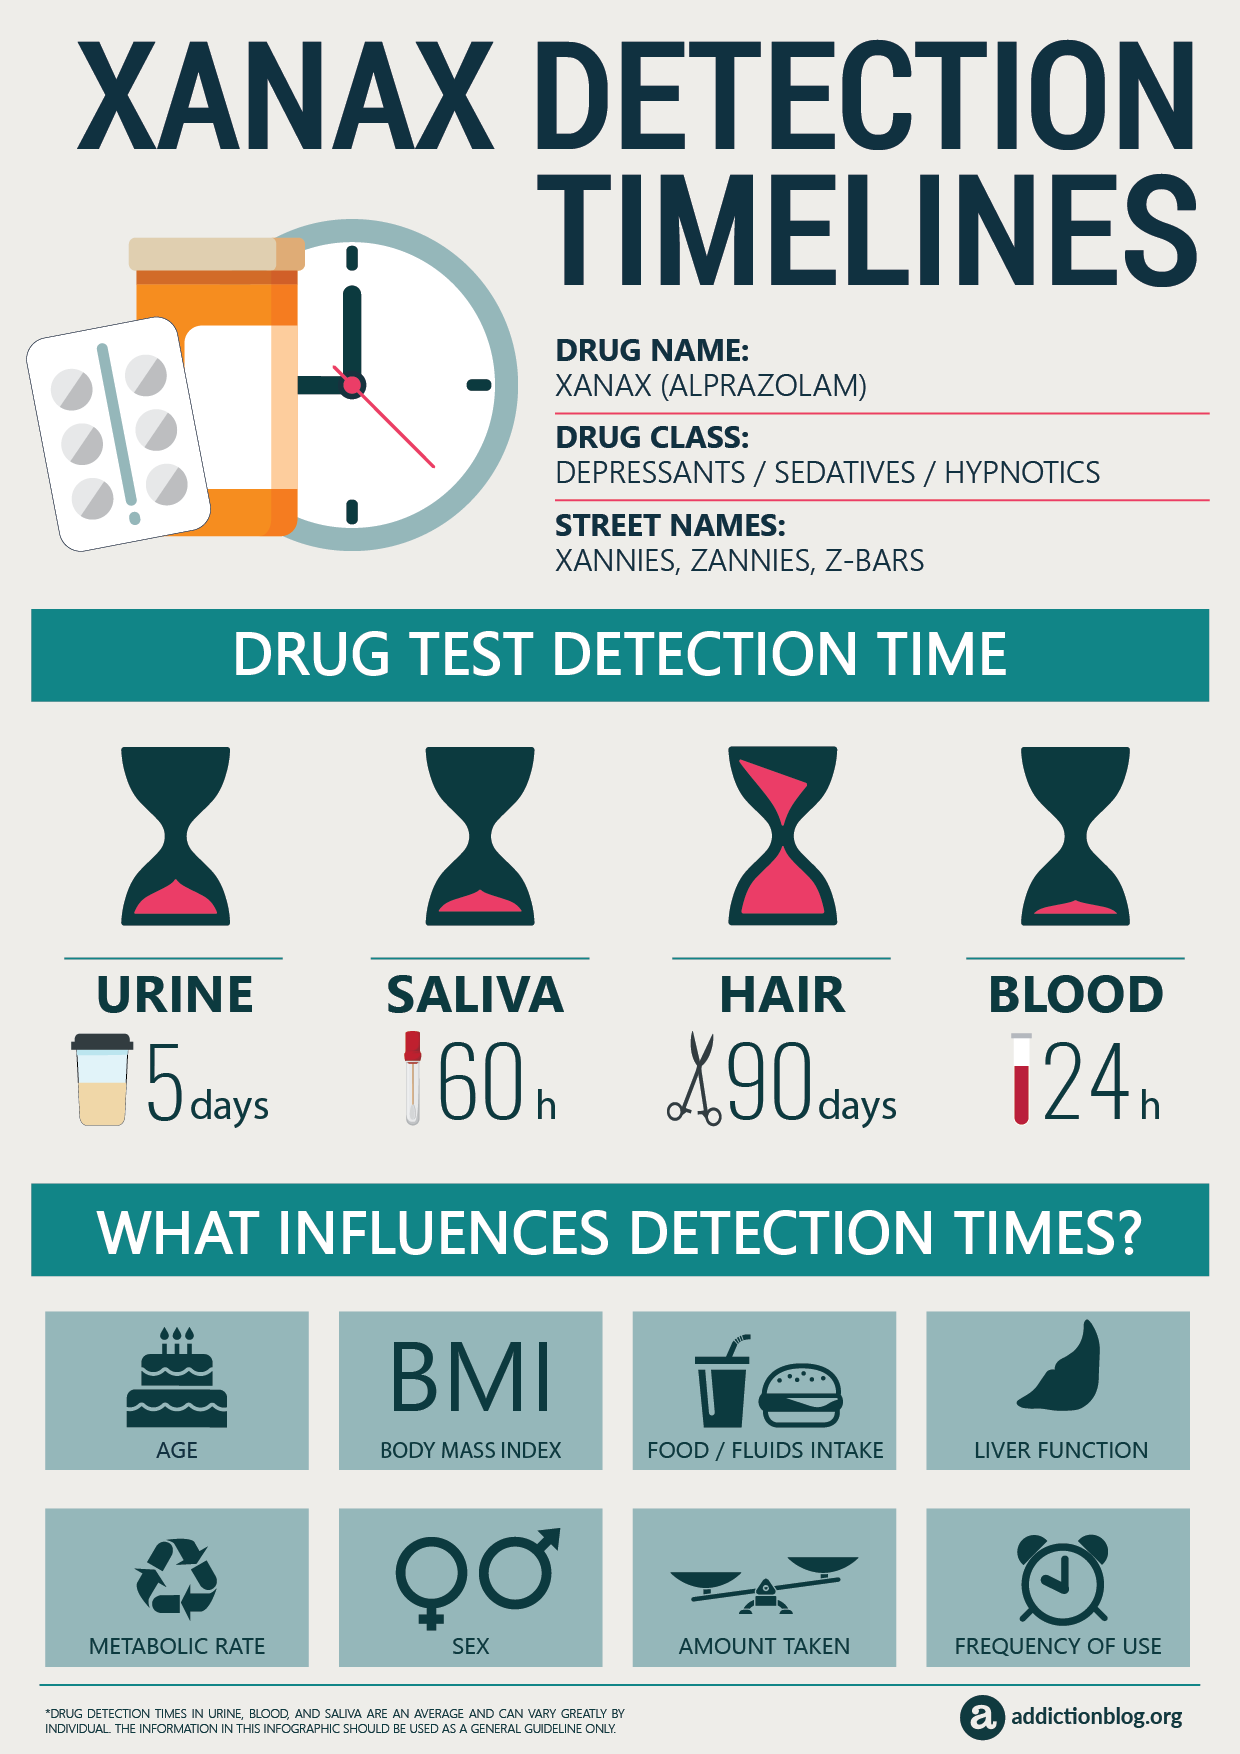 Xanax Detection Timelines (INFOGRAPHIC)